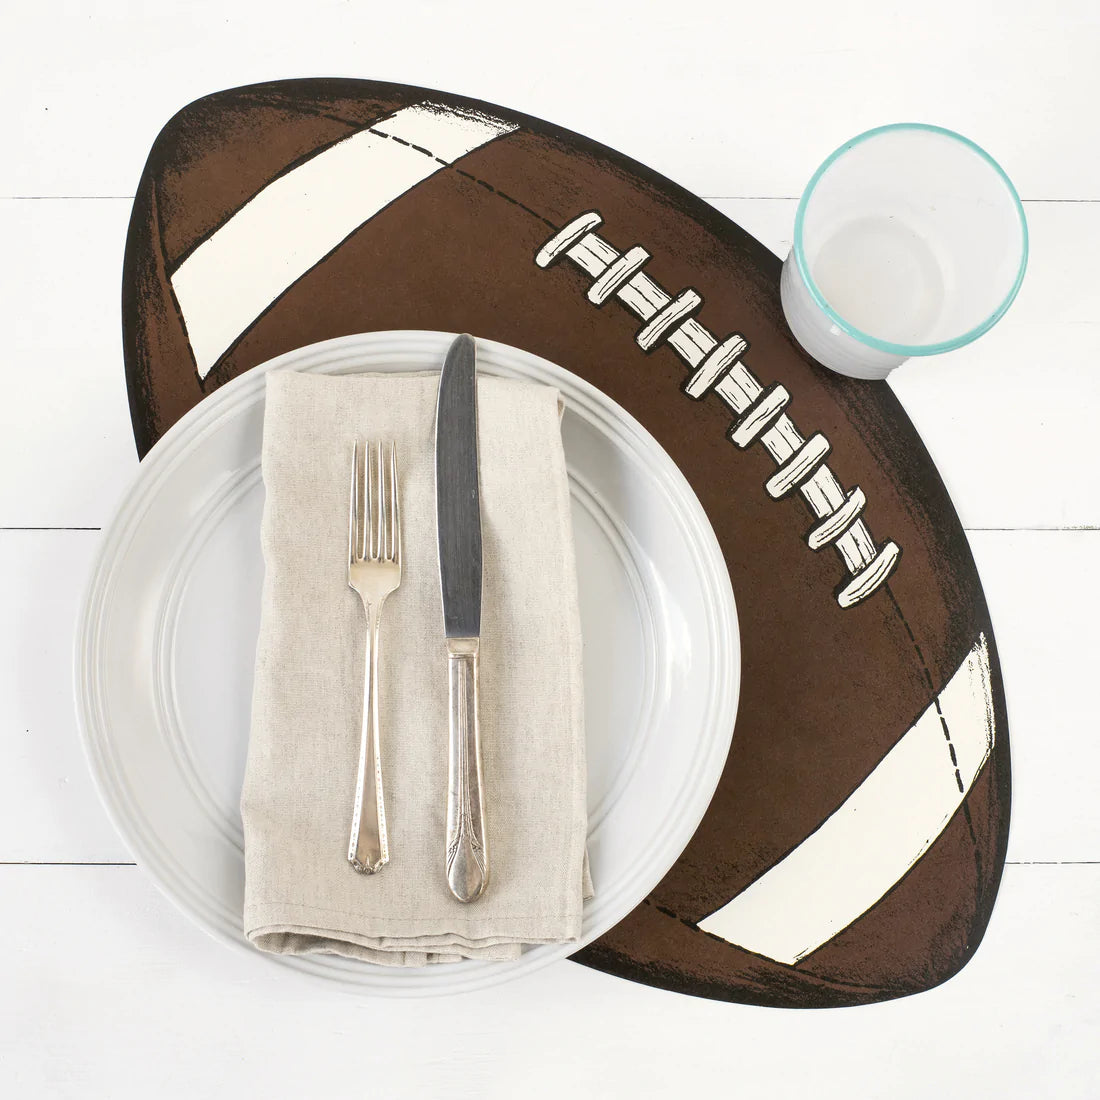 Hester & Cook Die-Cut Placemats: Football